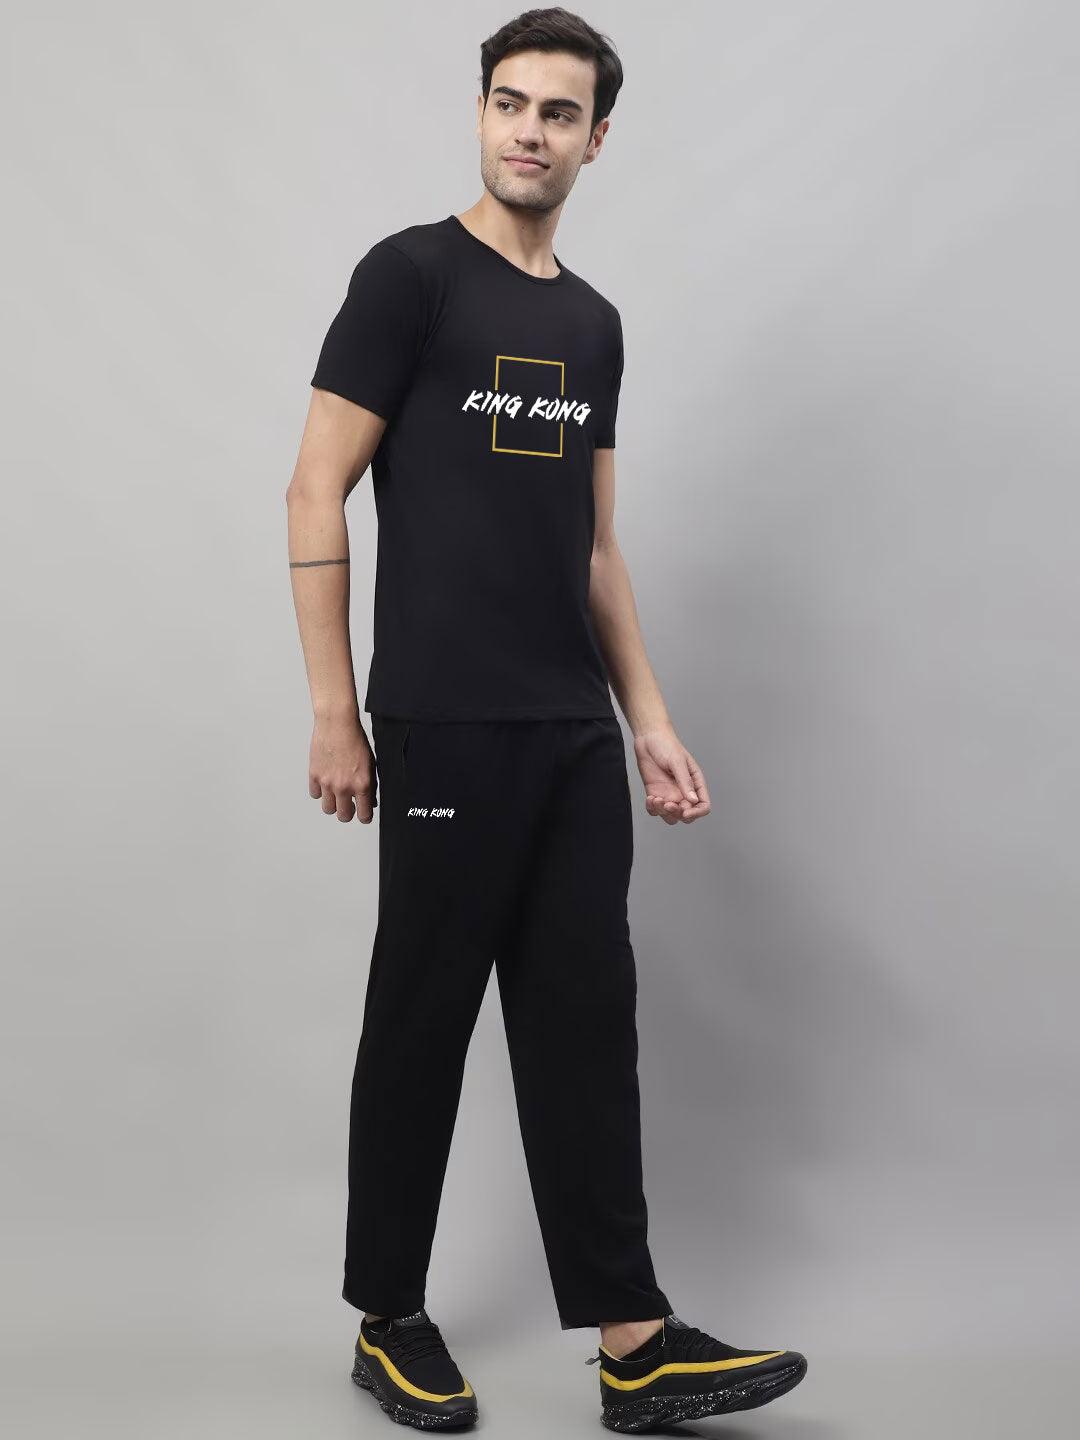 Mens Fitted Track Suits in Black Colour - Aadhitri